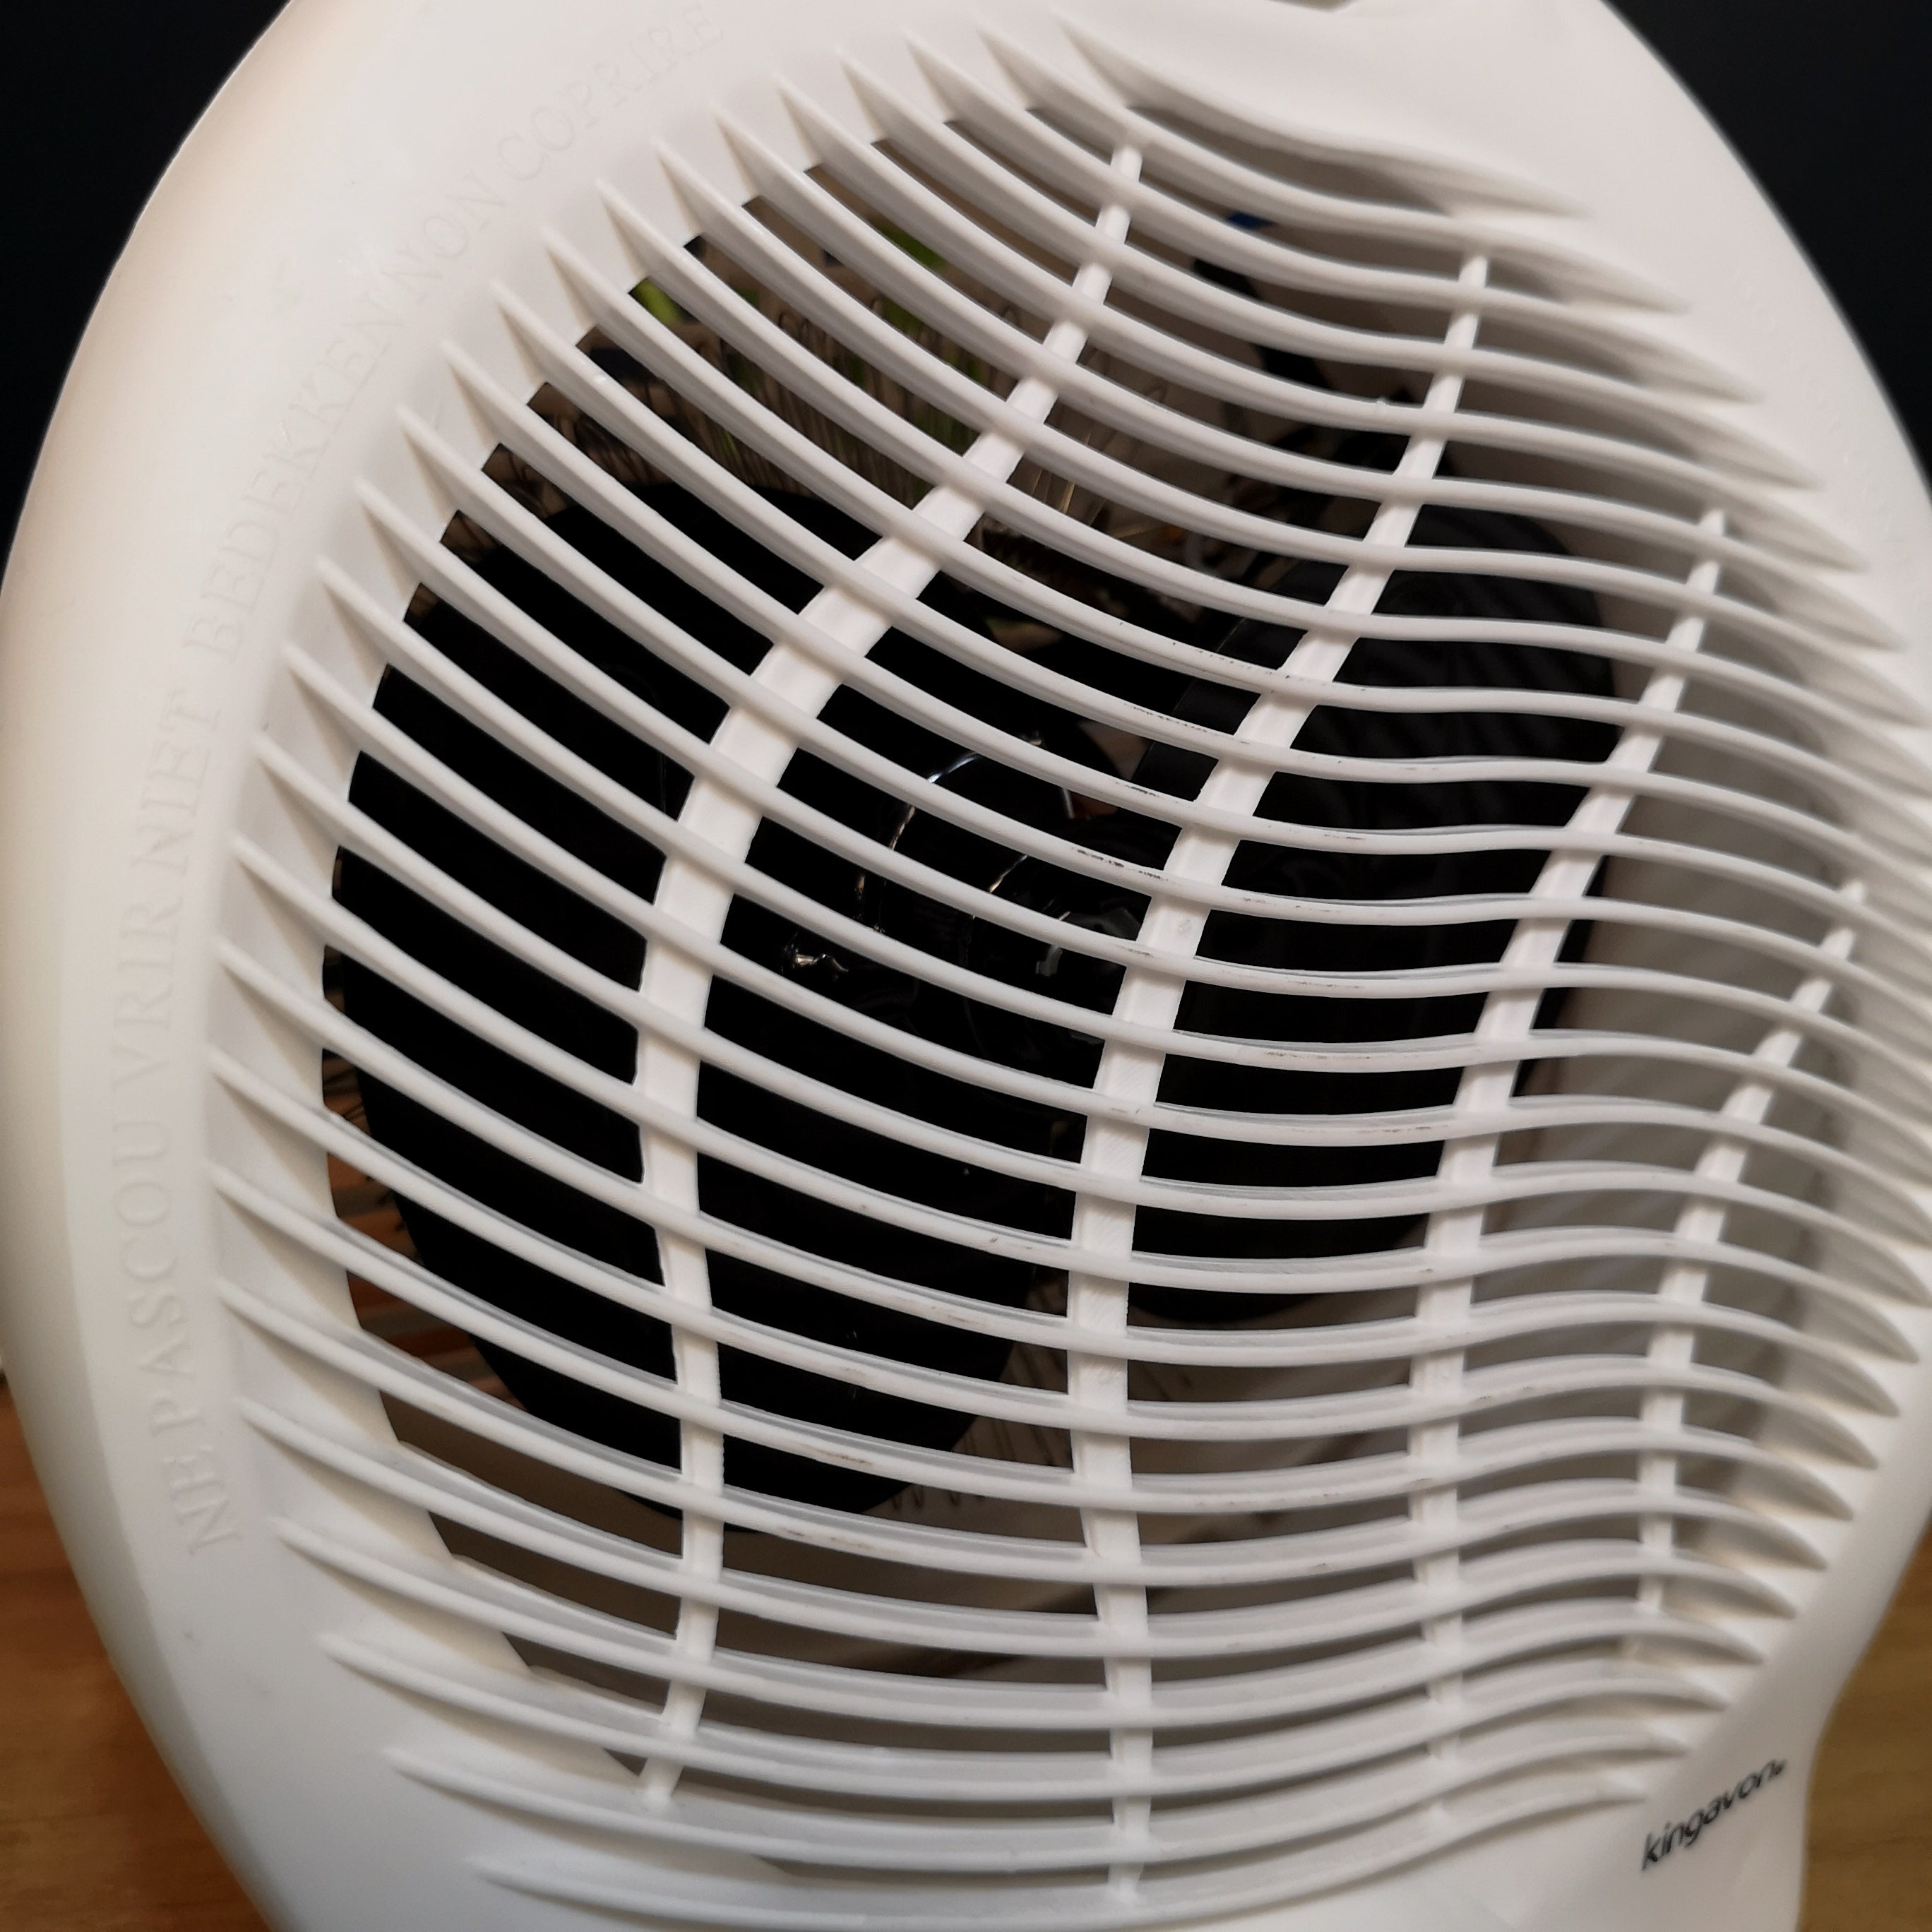 2KW White Upright Portable Lightweight Electric Fan Heater with Adjustable Thermostat